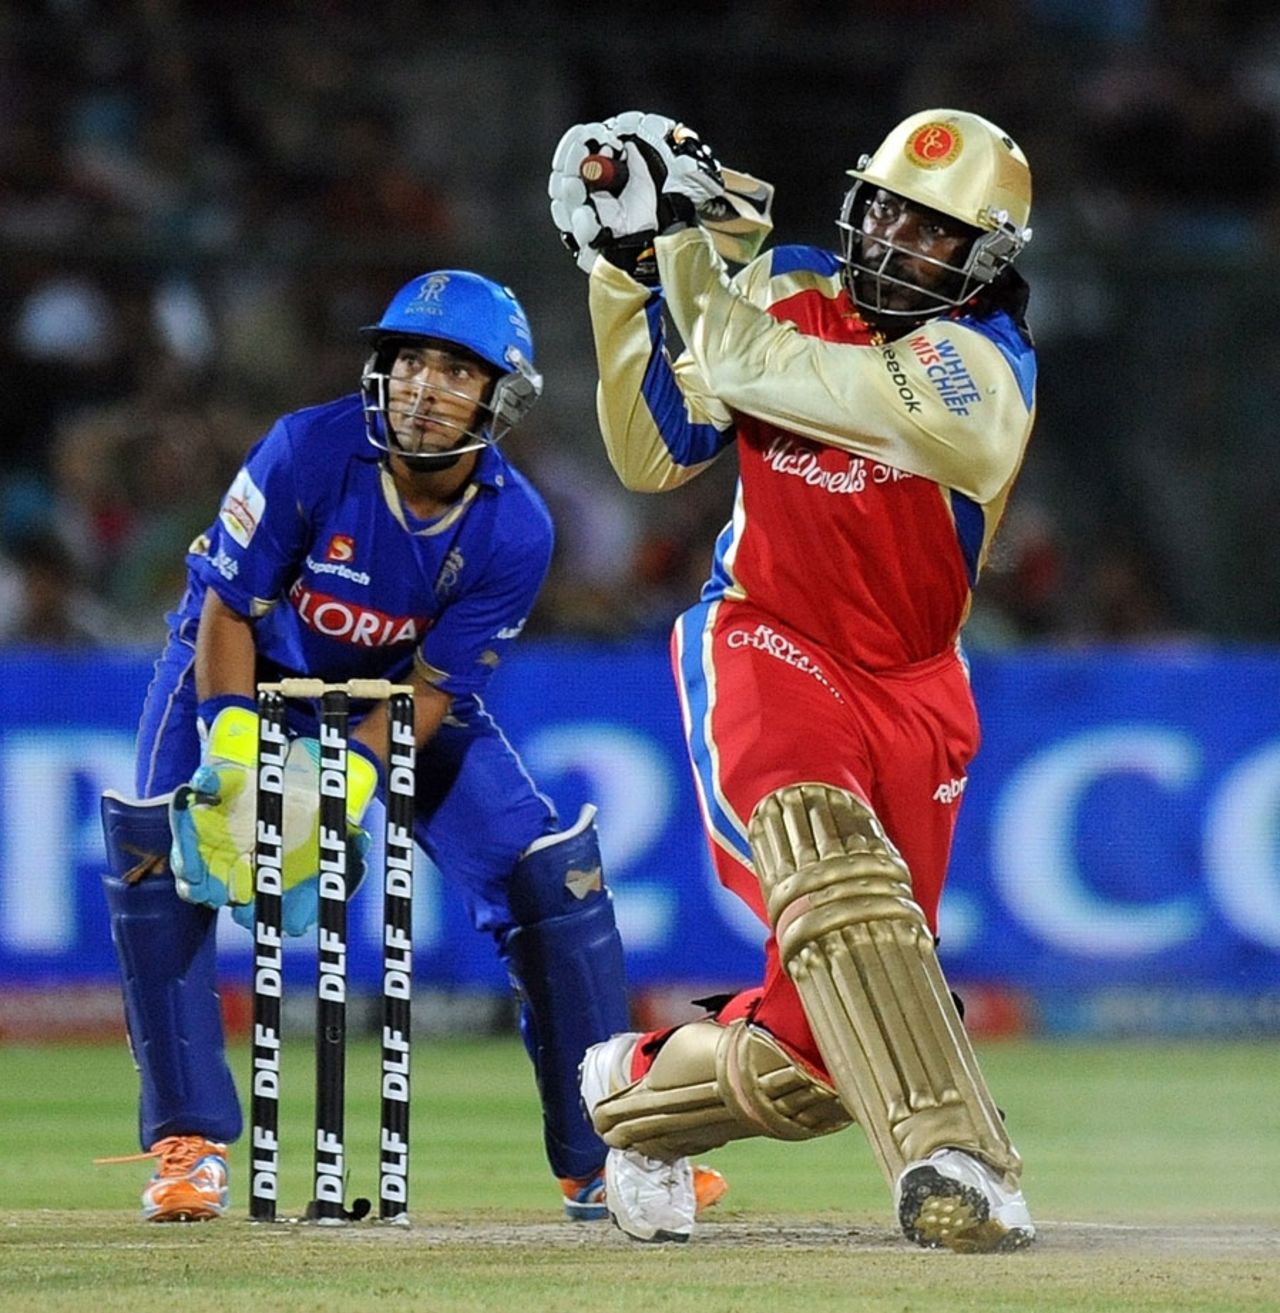 Chris Gayle aims for the midwicket boundary, Rajasthan Royals v Royal Challengers Bangalore, IPL 2011, Jaipur, May 11, 2011